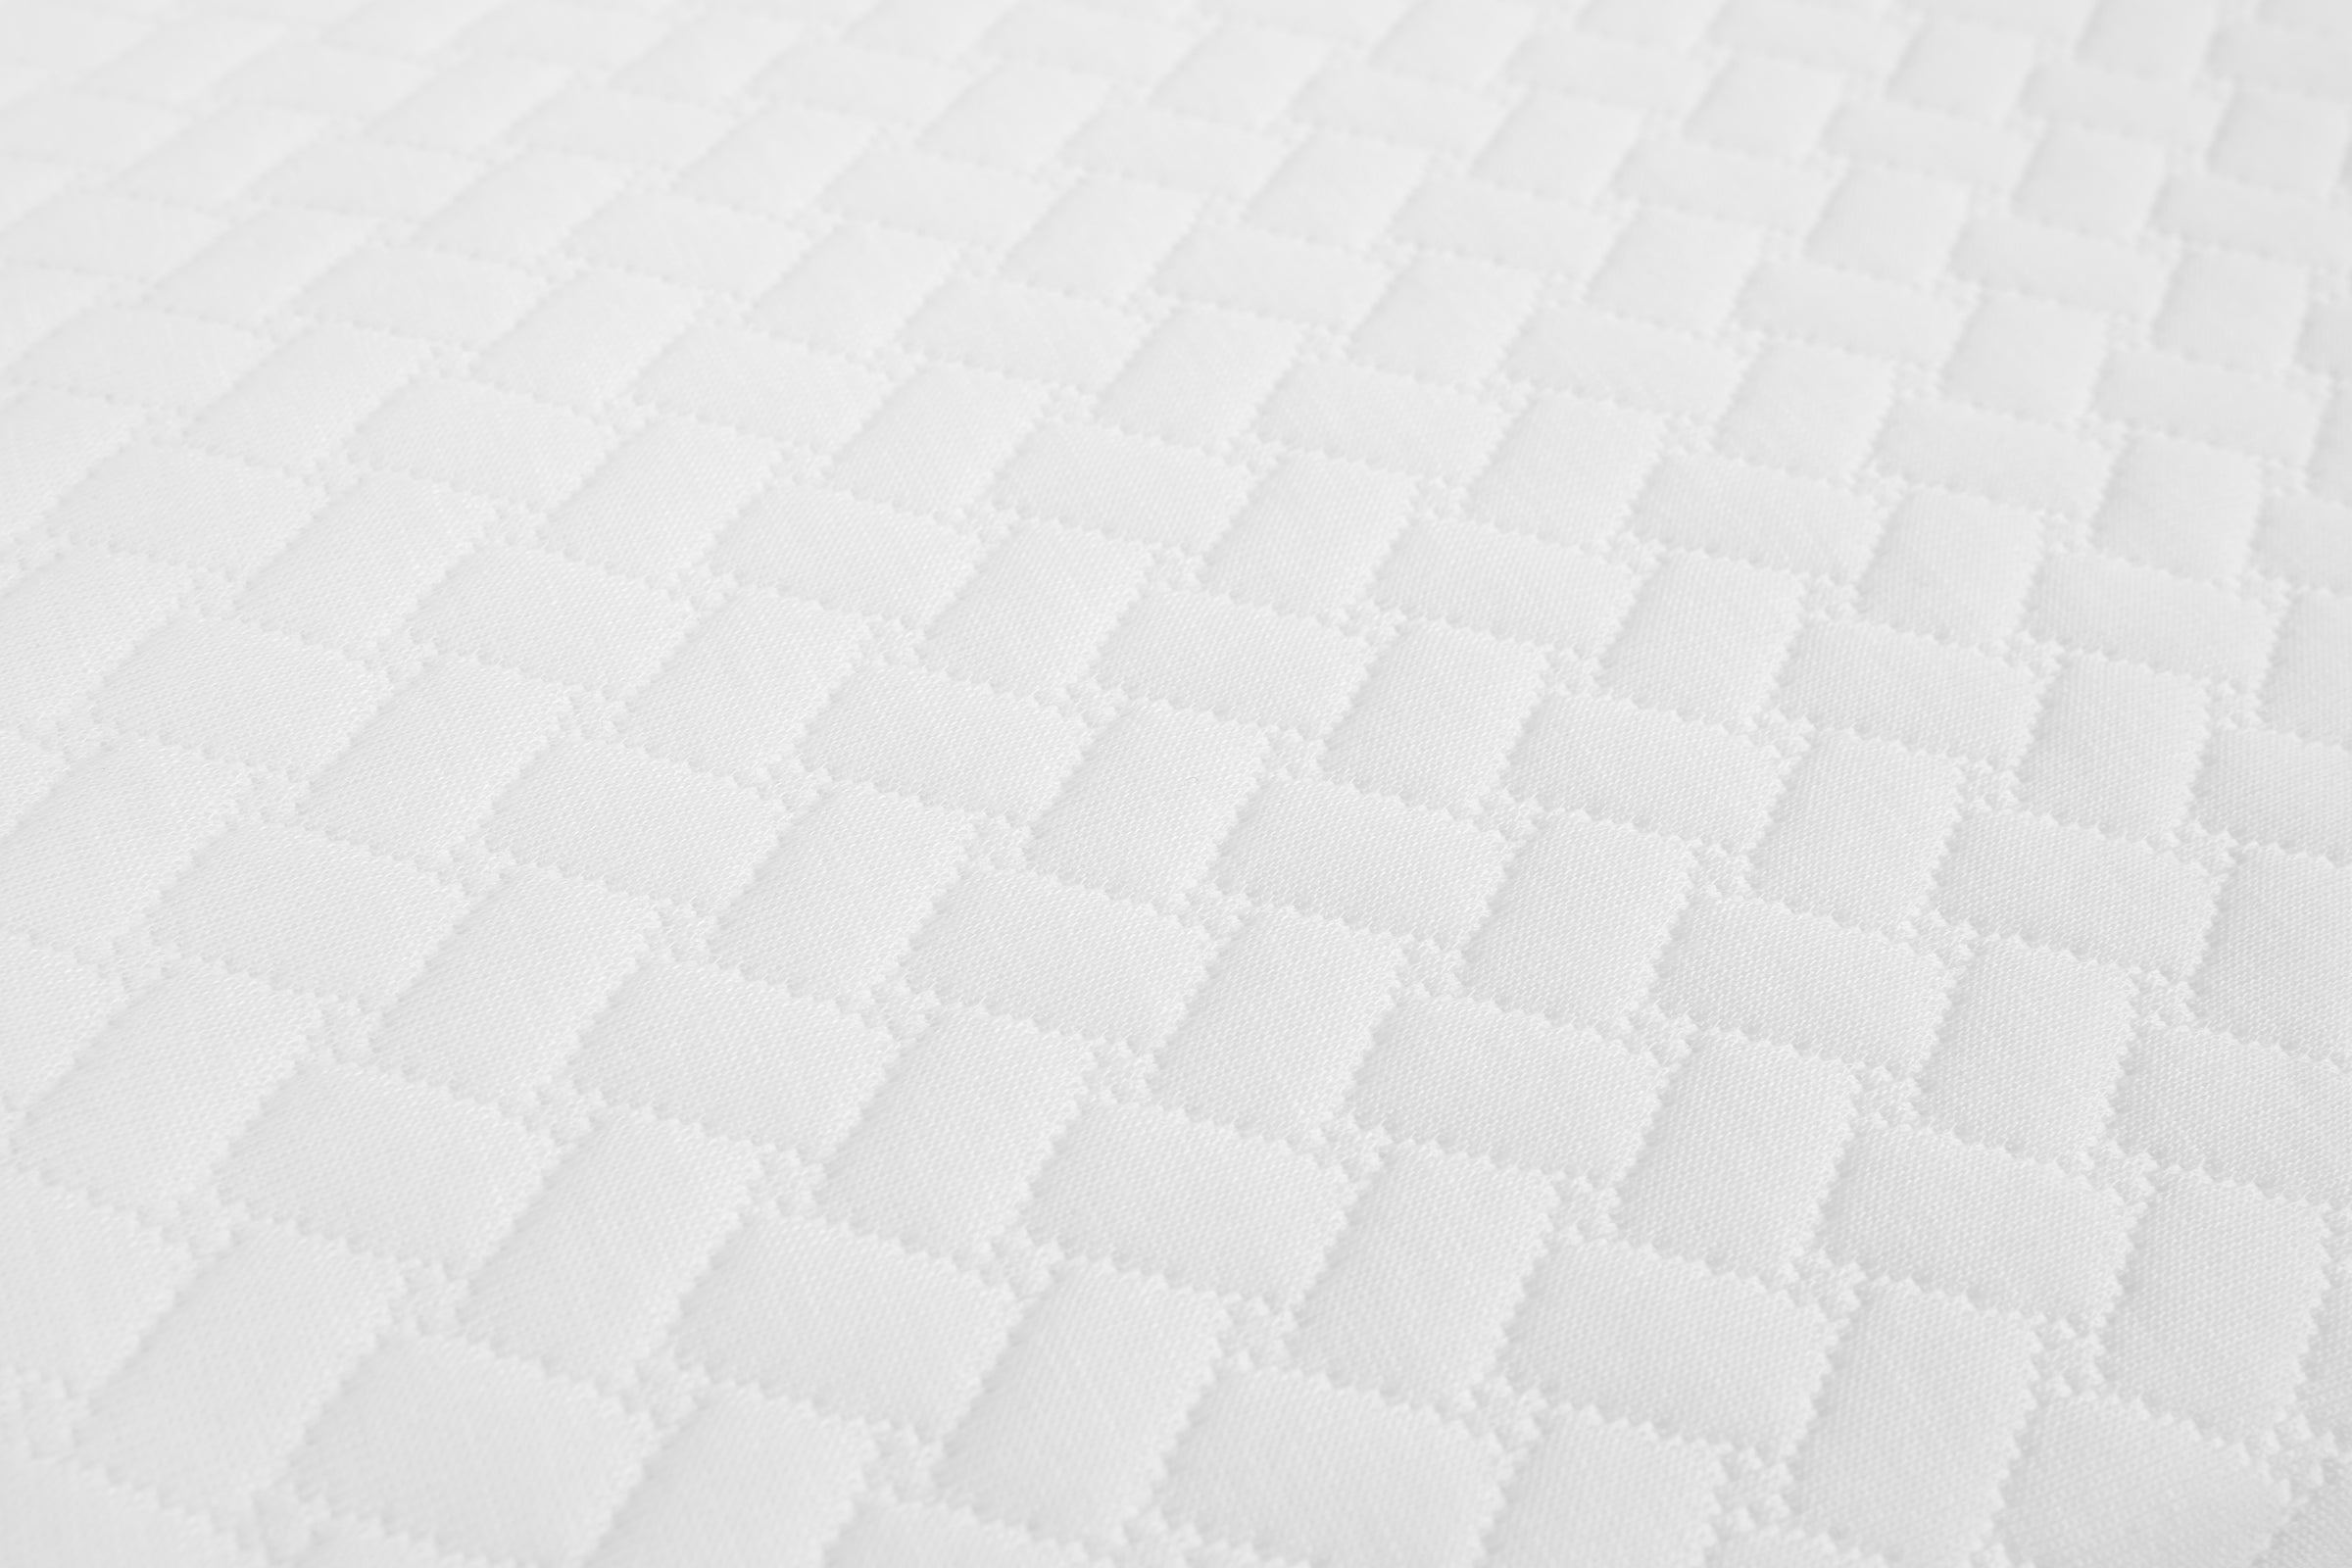 Quilted Mattress Pad